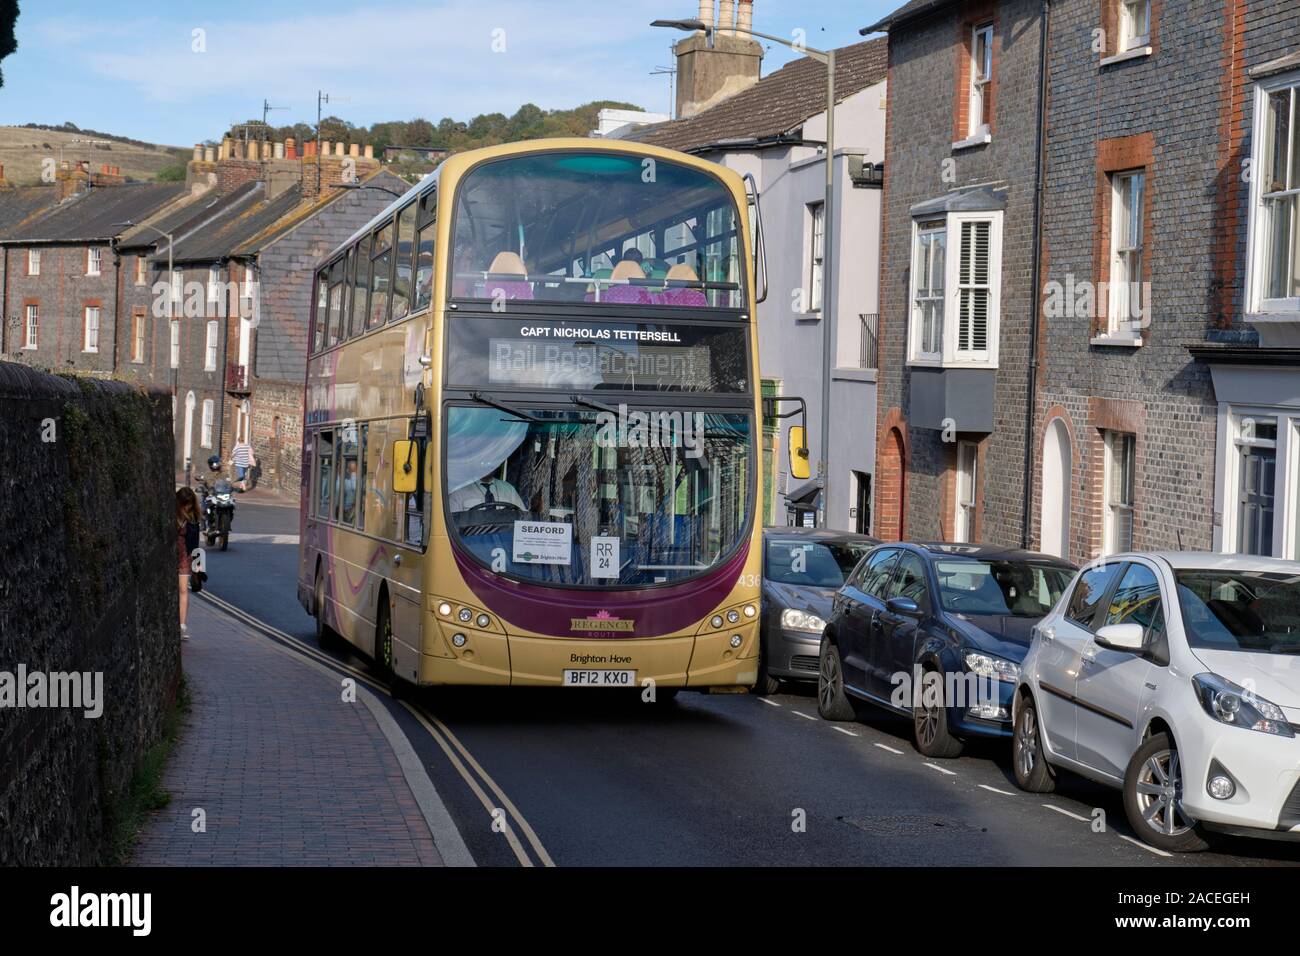 Rail replacement double decker bus going through the narrow streets of Lewes, UK.  September 15, 2019 Stock Photo